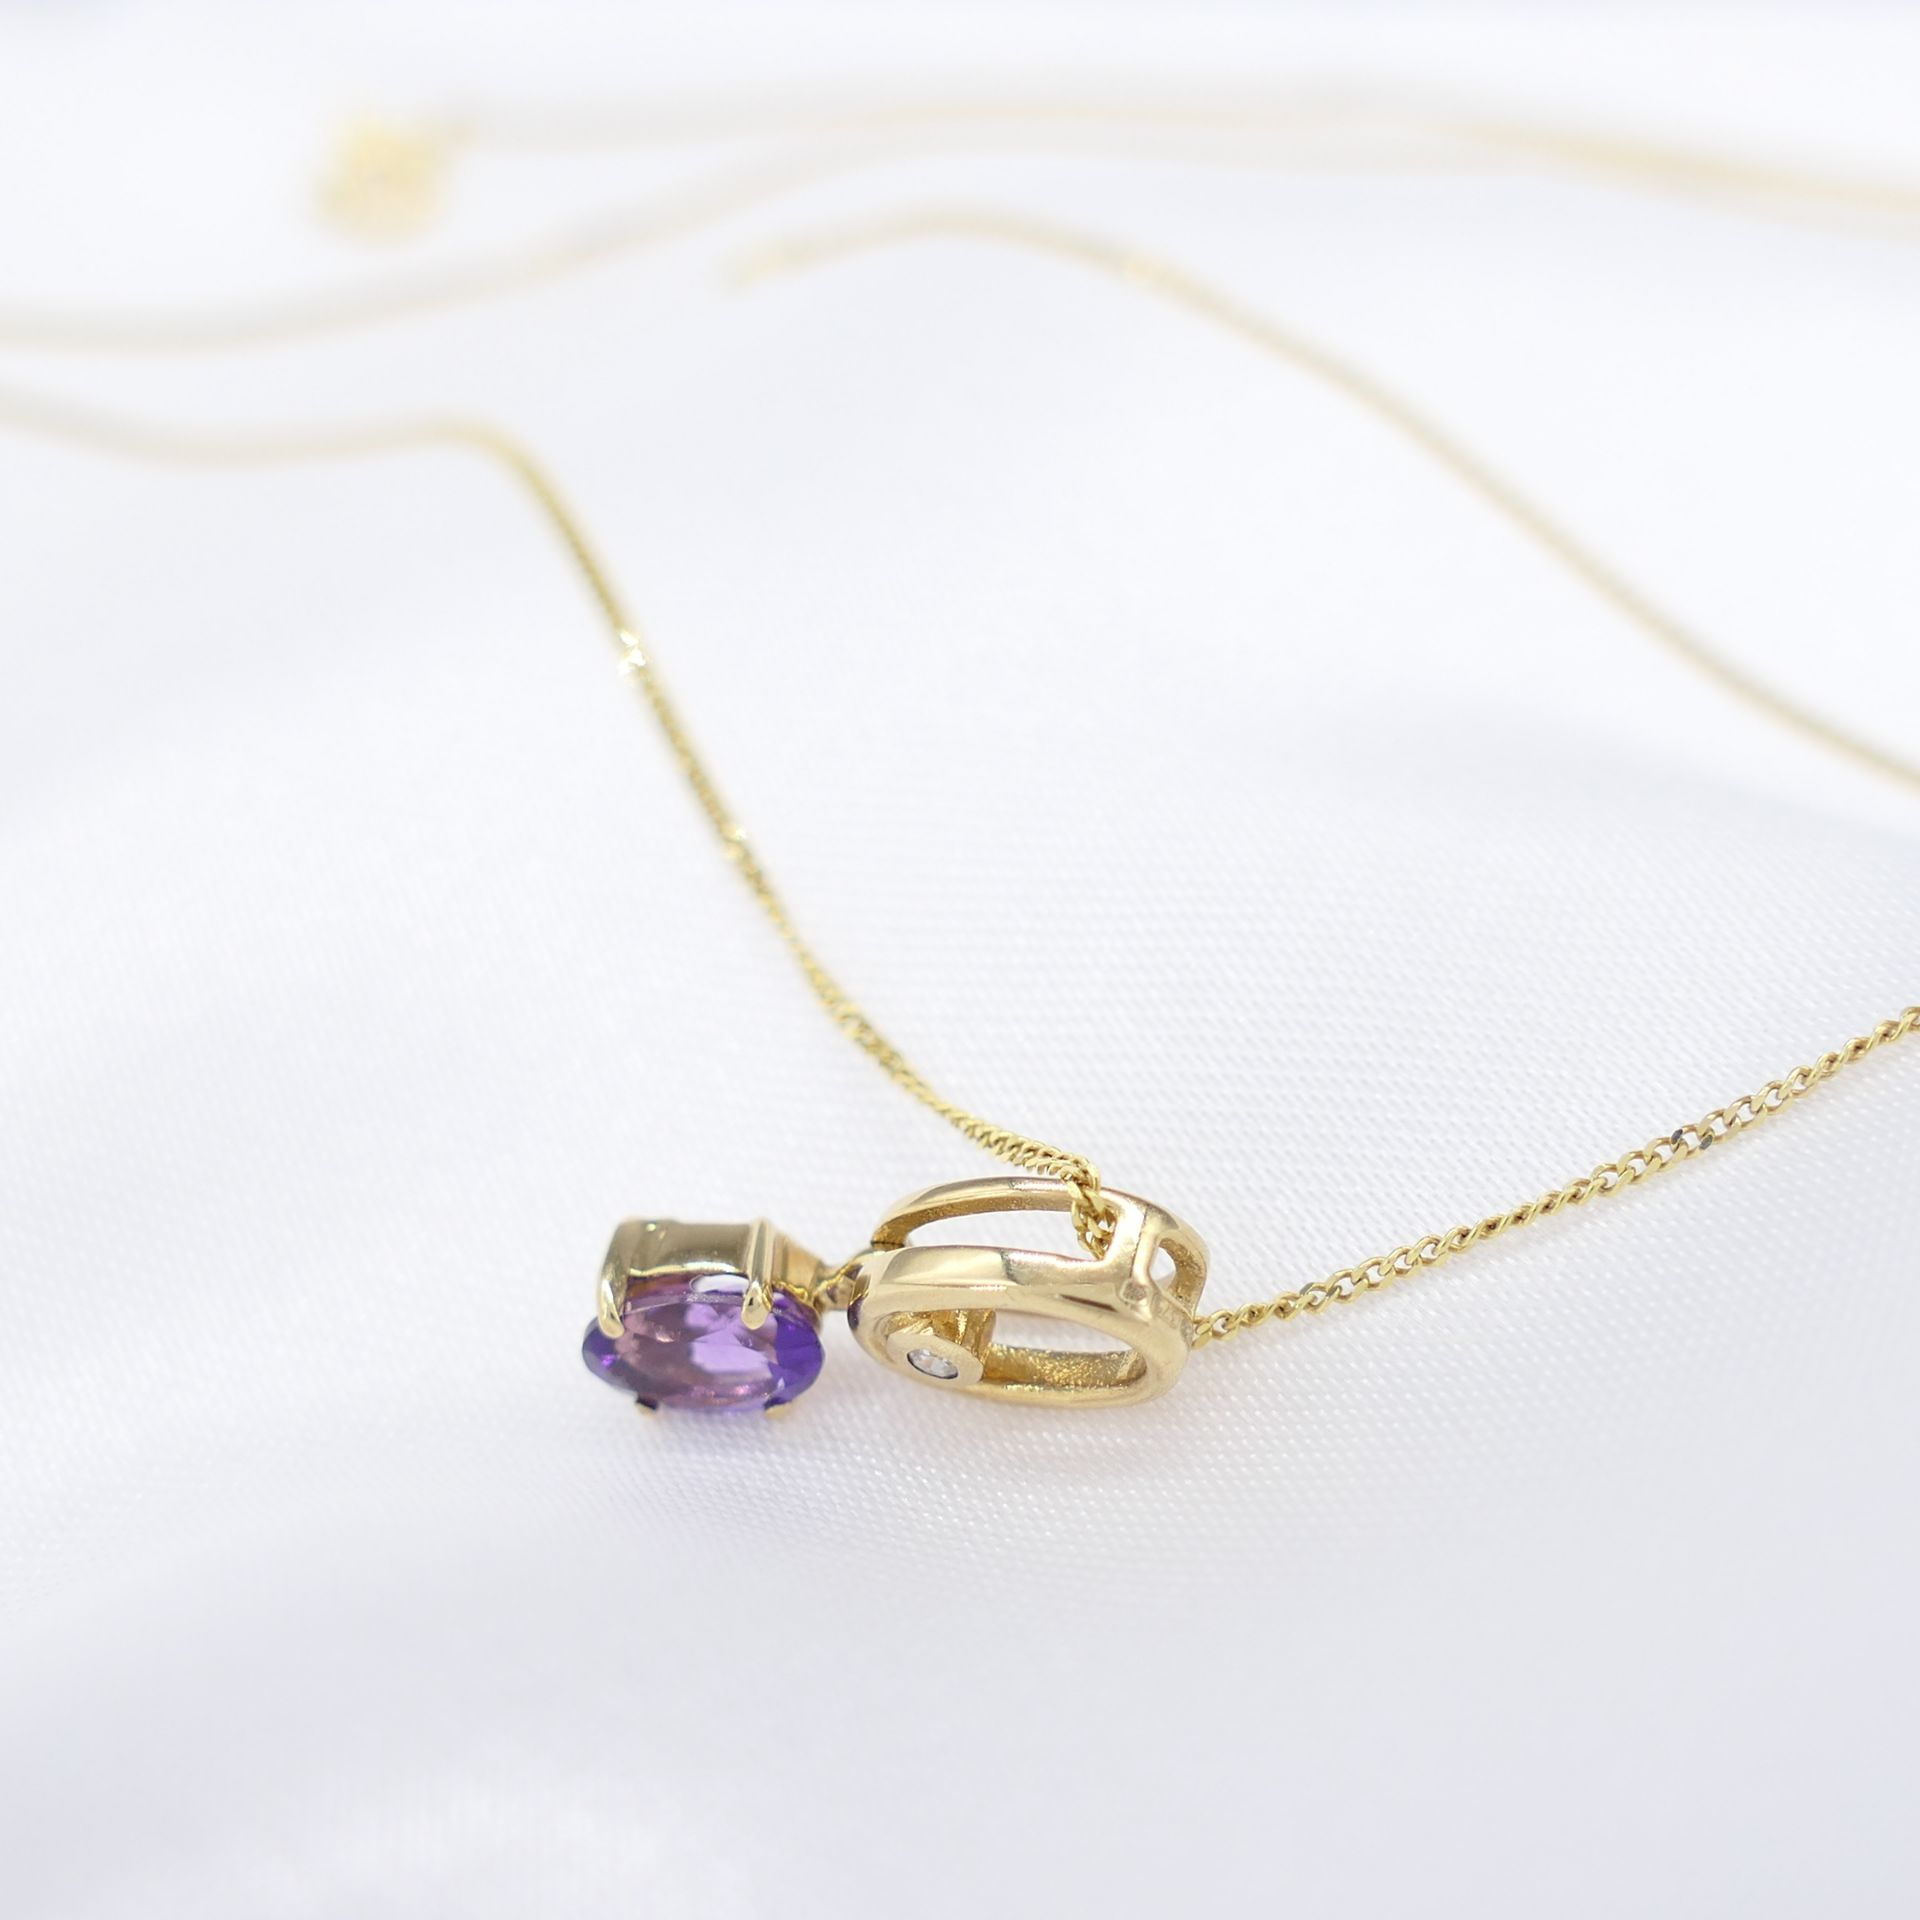 Attractive Yellow Gold Amethyst and Diamond Necklace, Supplied With A Gift Box - Image 5 of 6